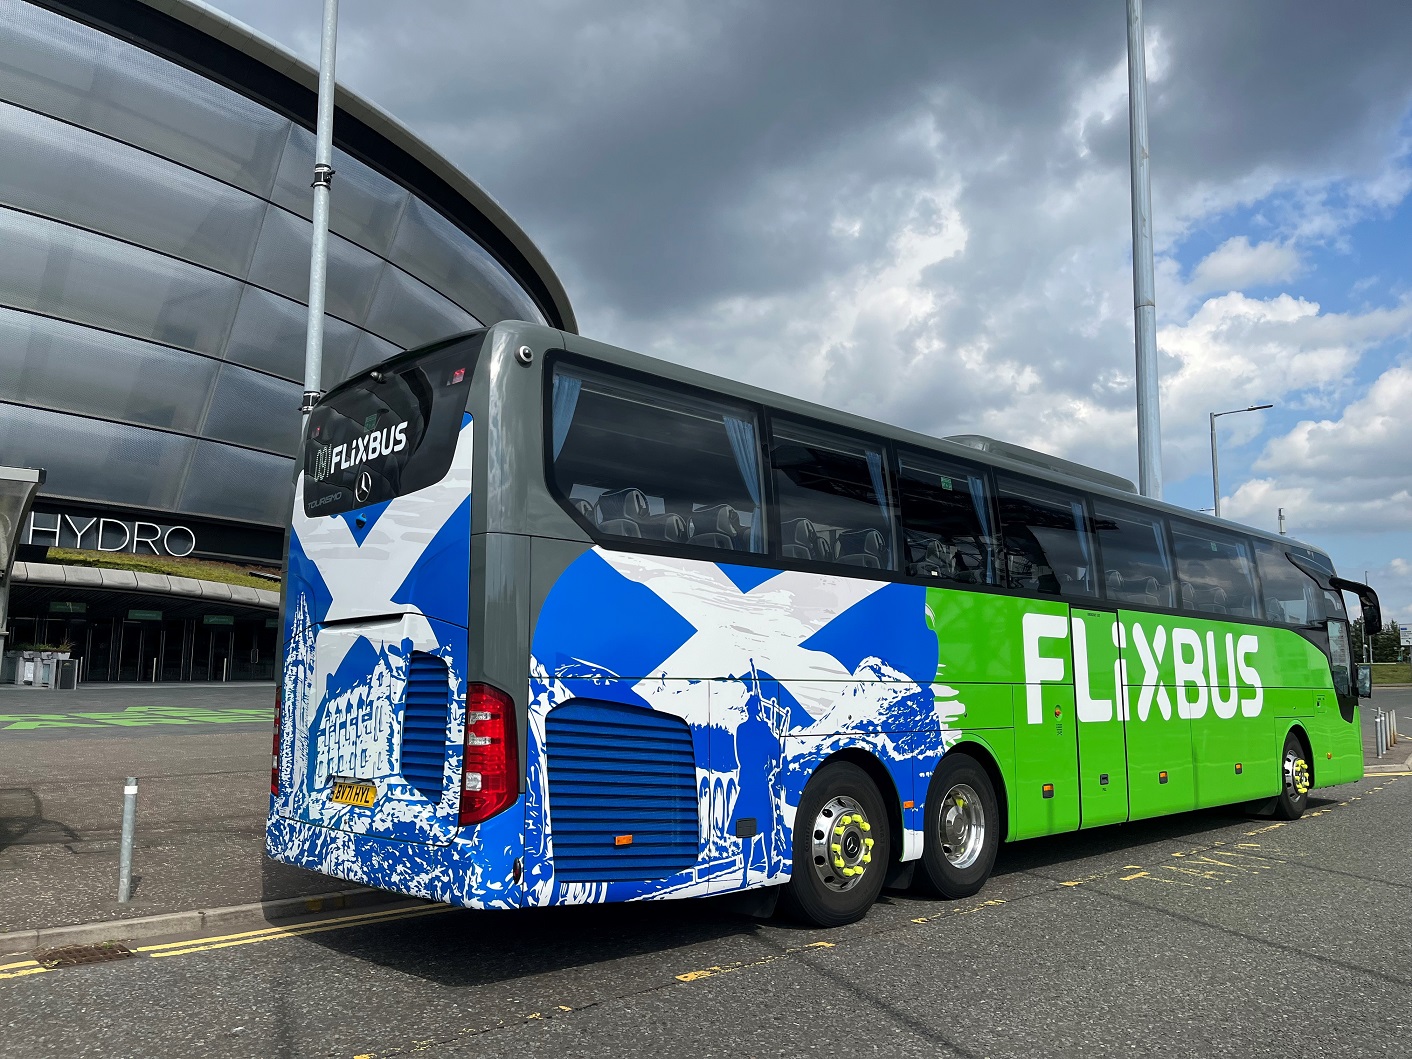 FlixBus threatens Stagecoach with CMA compliant over Aberdeen bus station